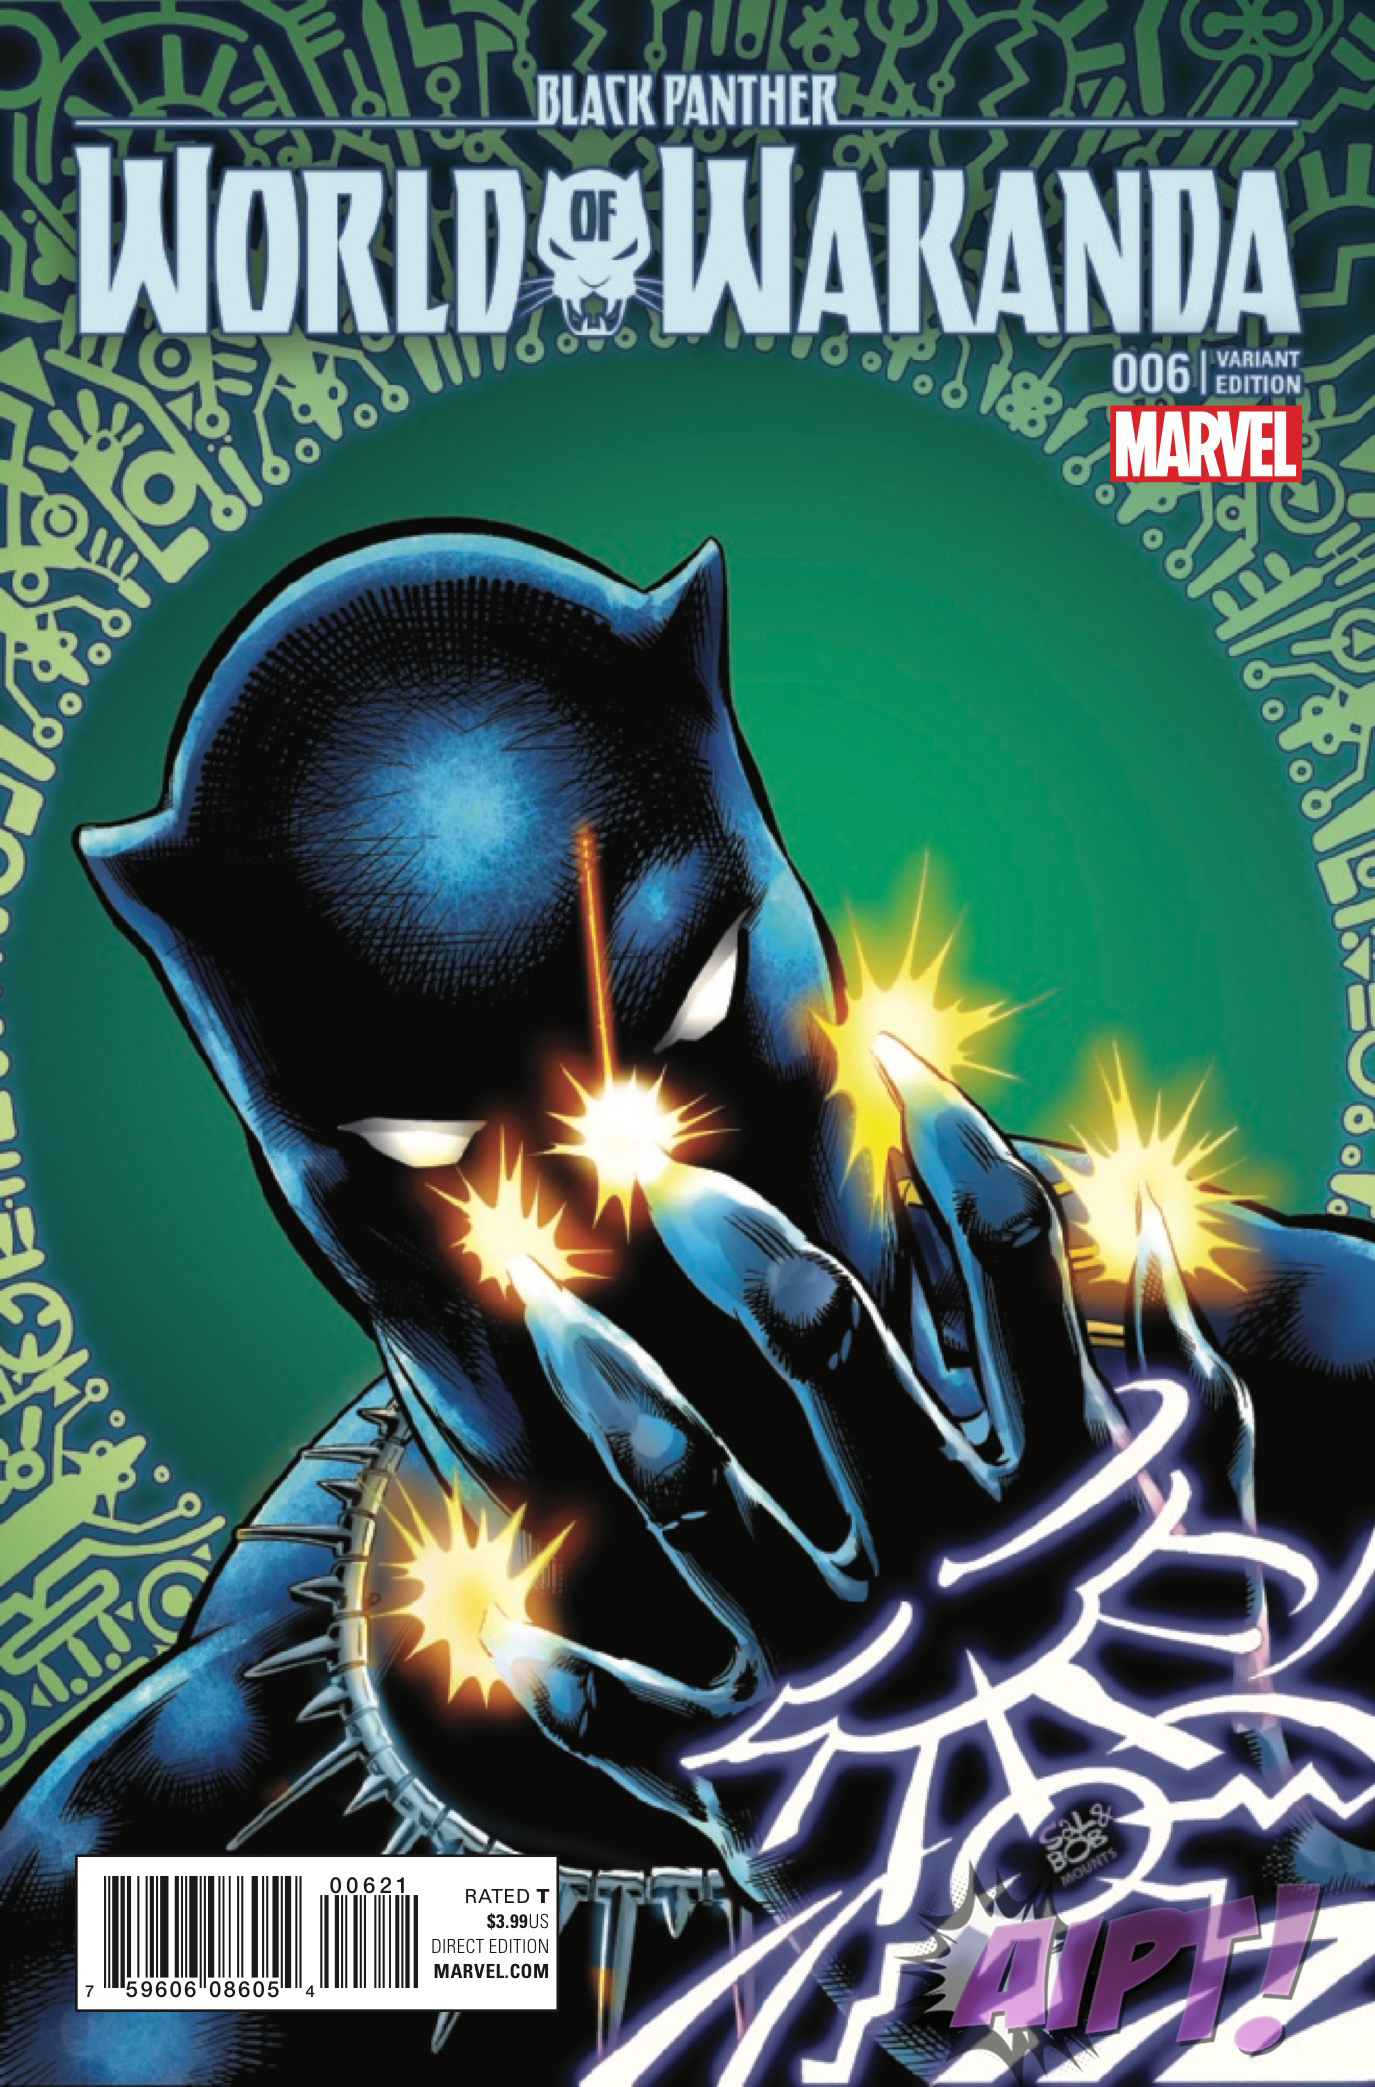 Black Panther: The World of Wakanda #6 Review